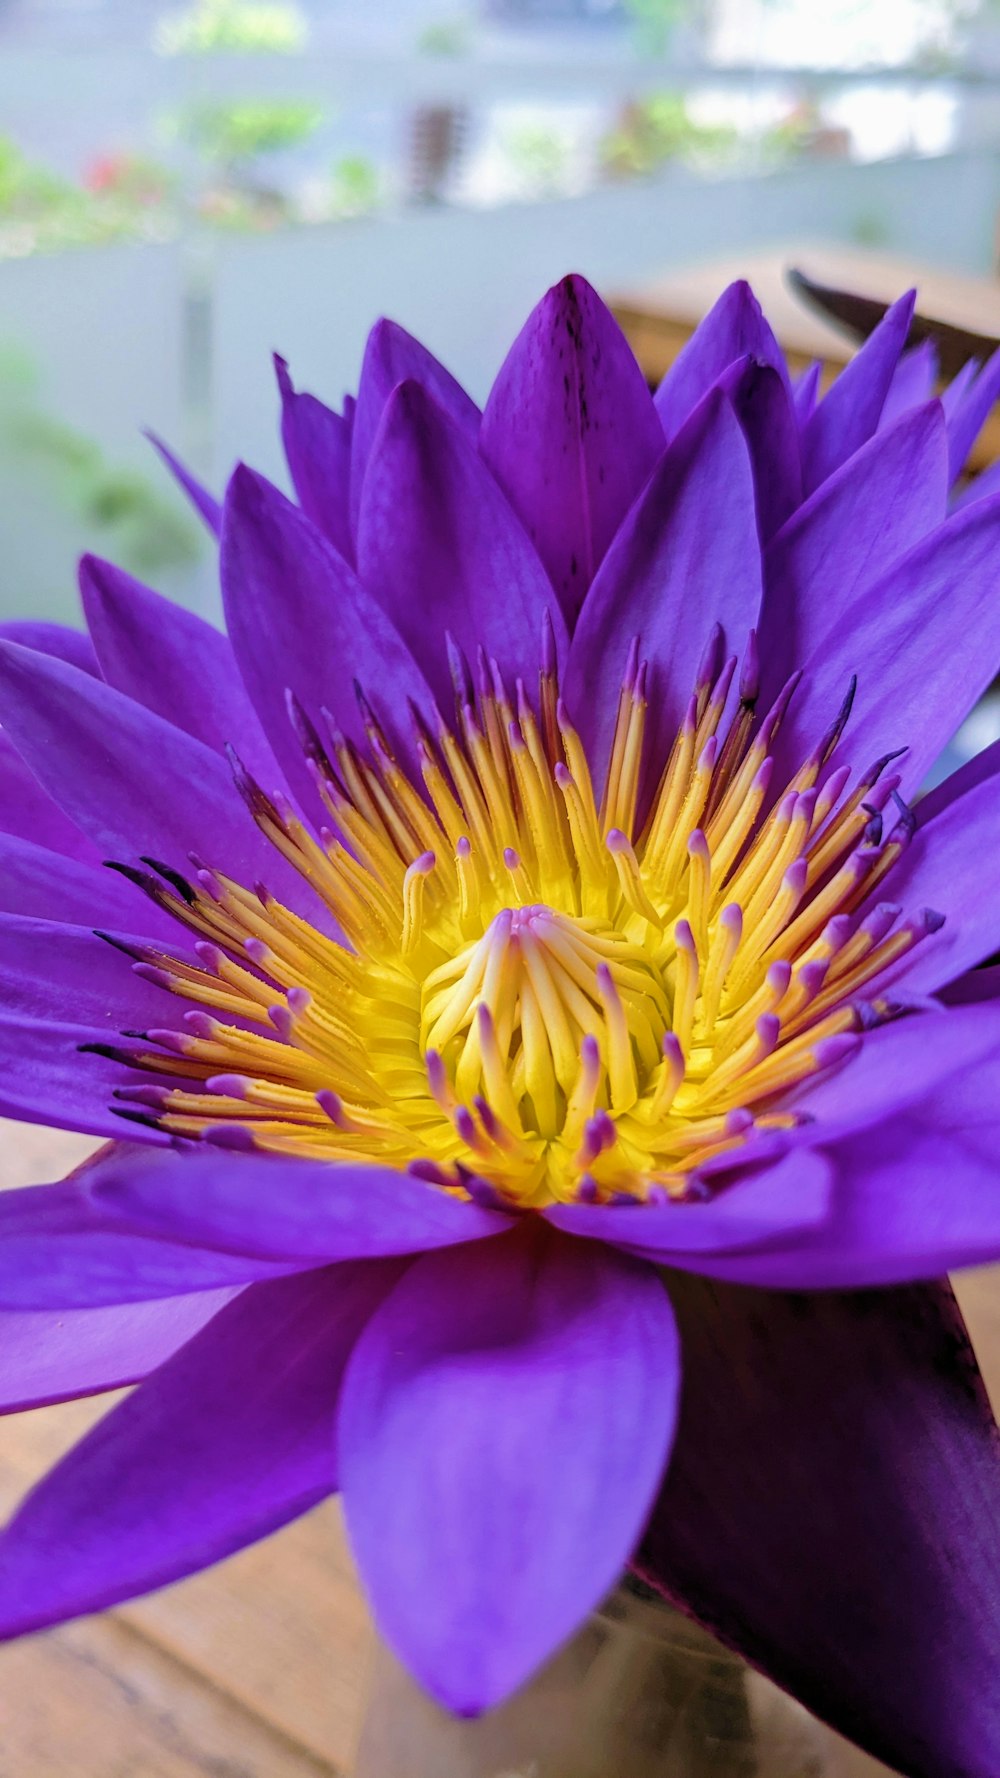 a purple flower with yellow center sitting on a table